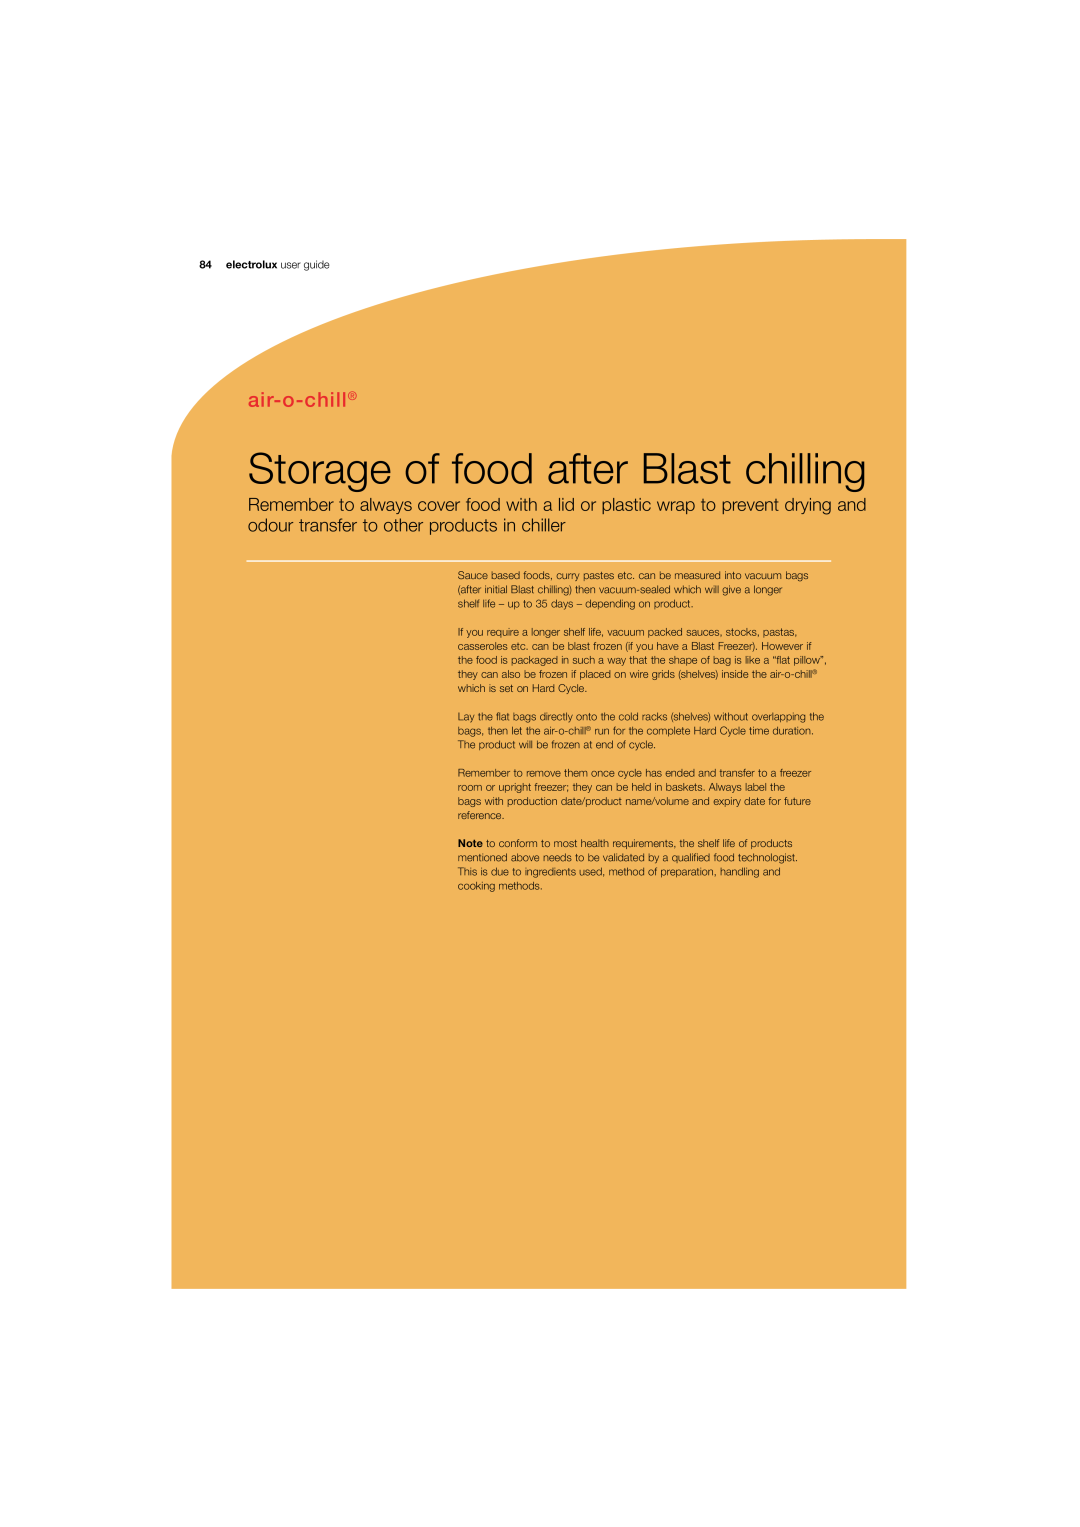 Electrolux 180 manual Storage of food after Blast chilling, air-o-chill, electrolux user guide 